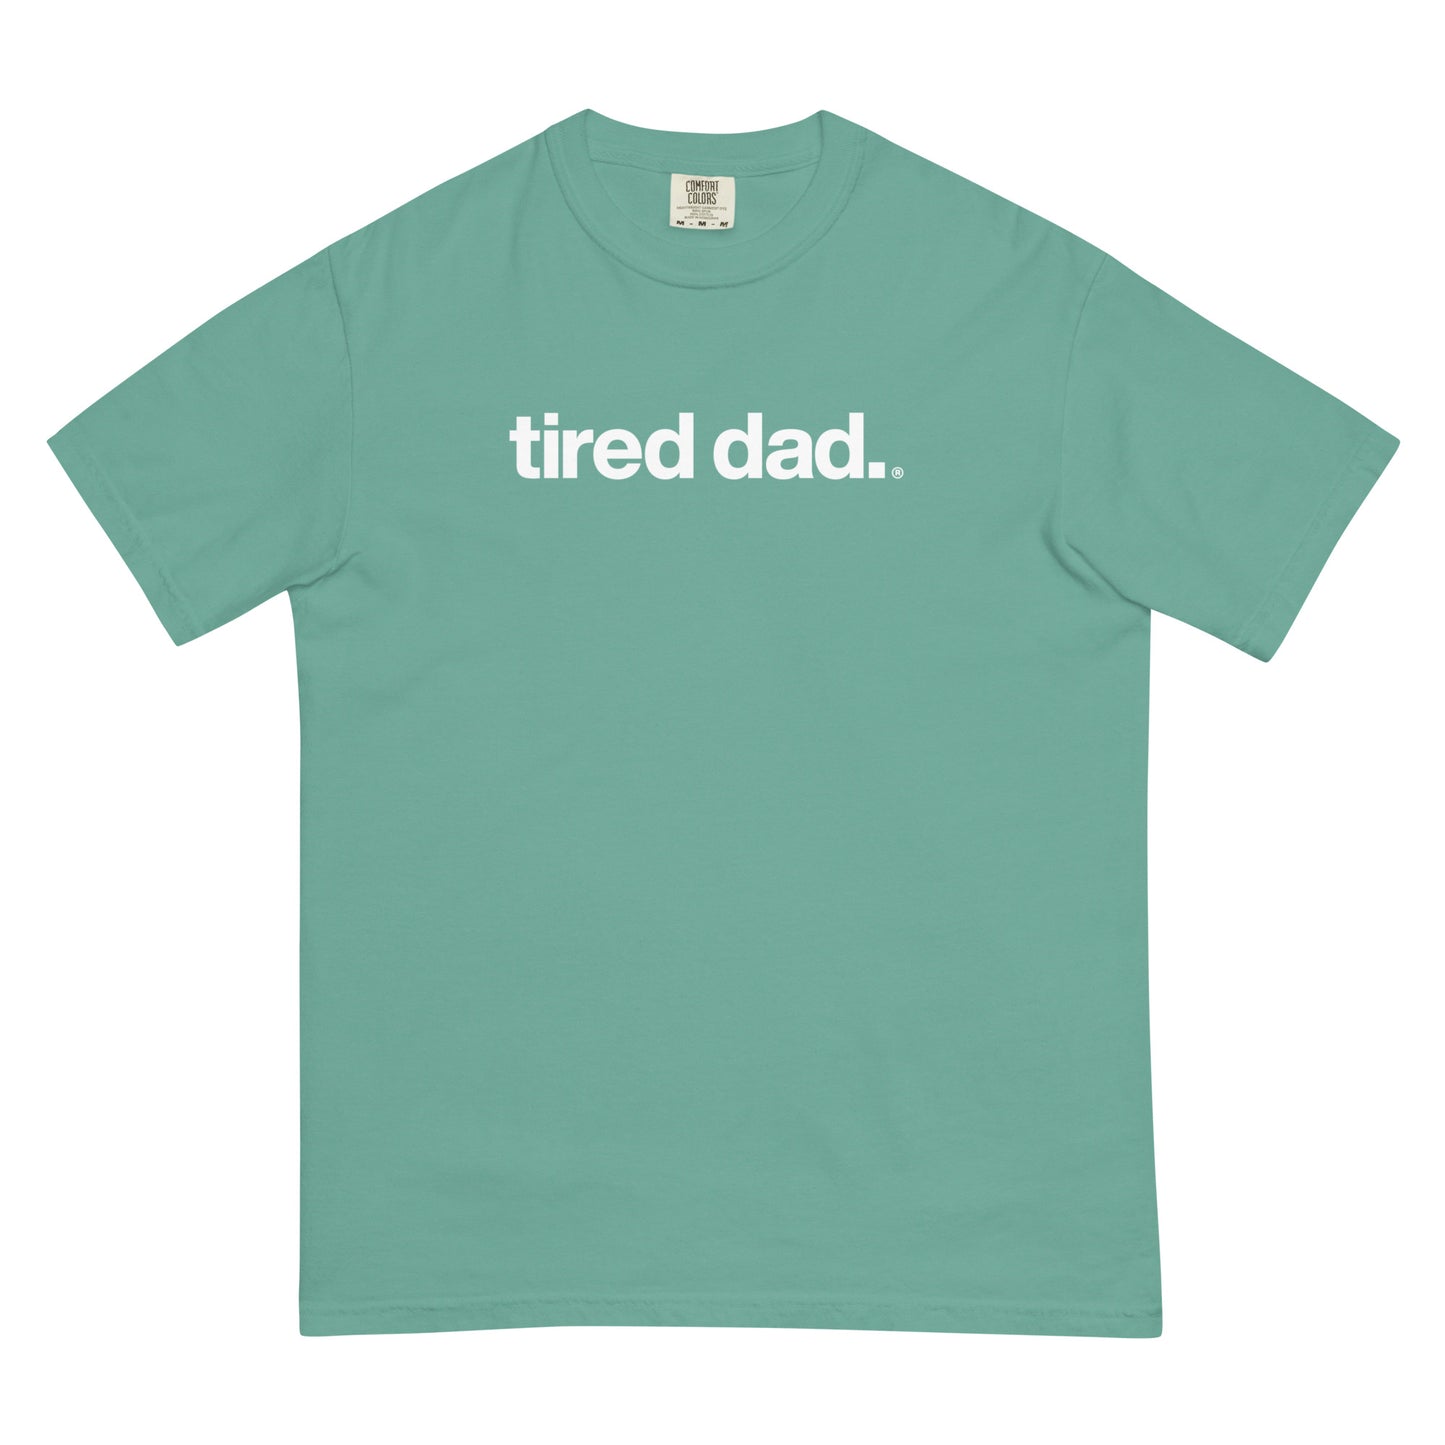 tired dad. t-shirt relaxed fit